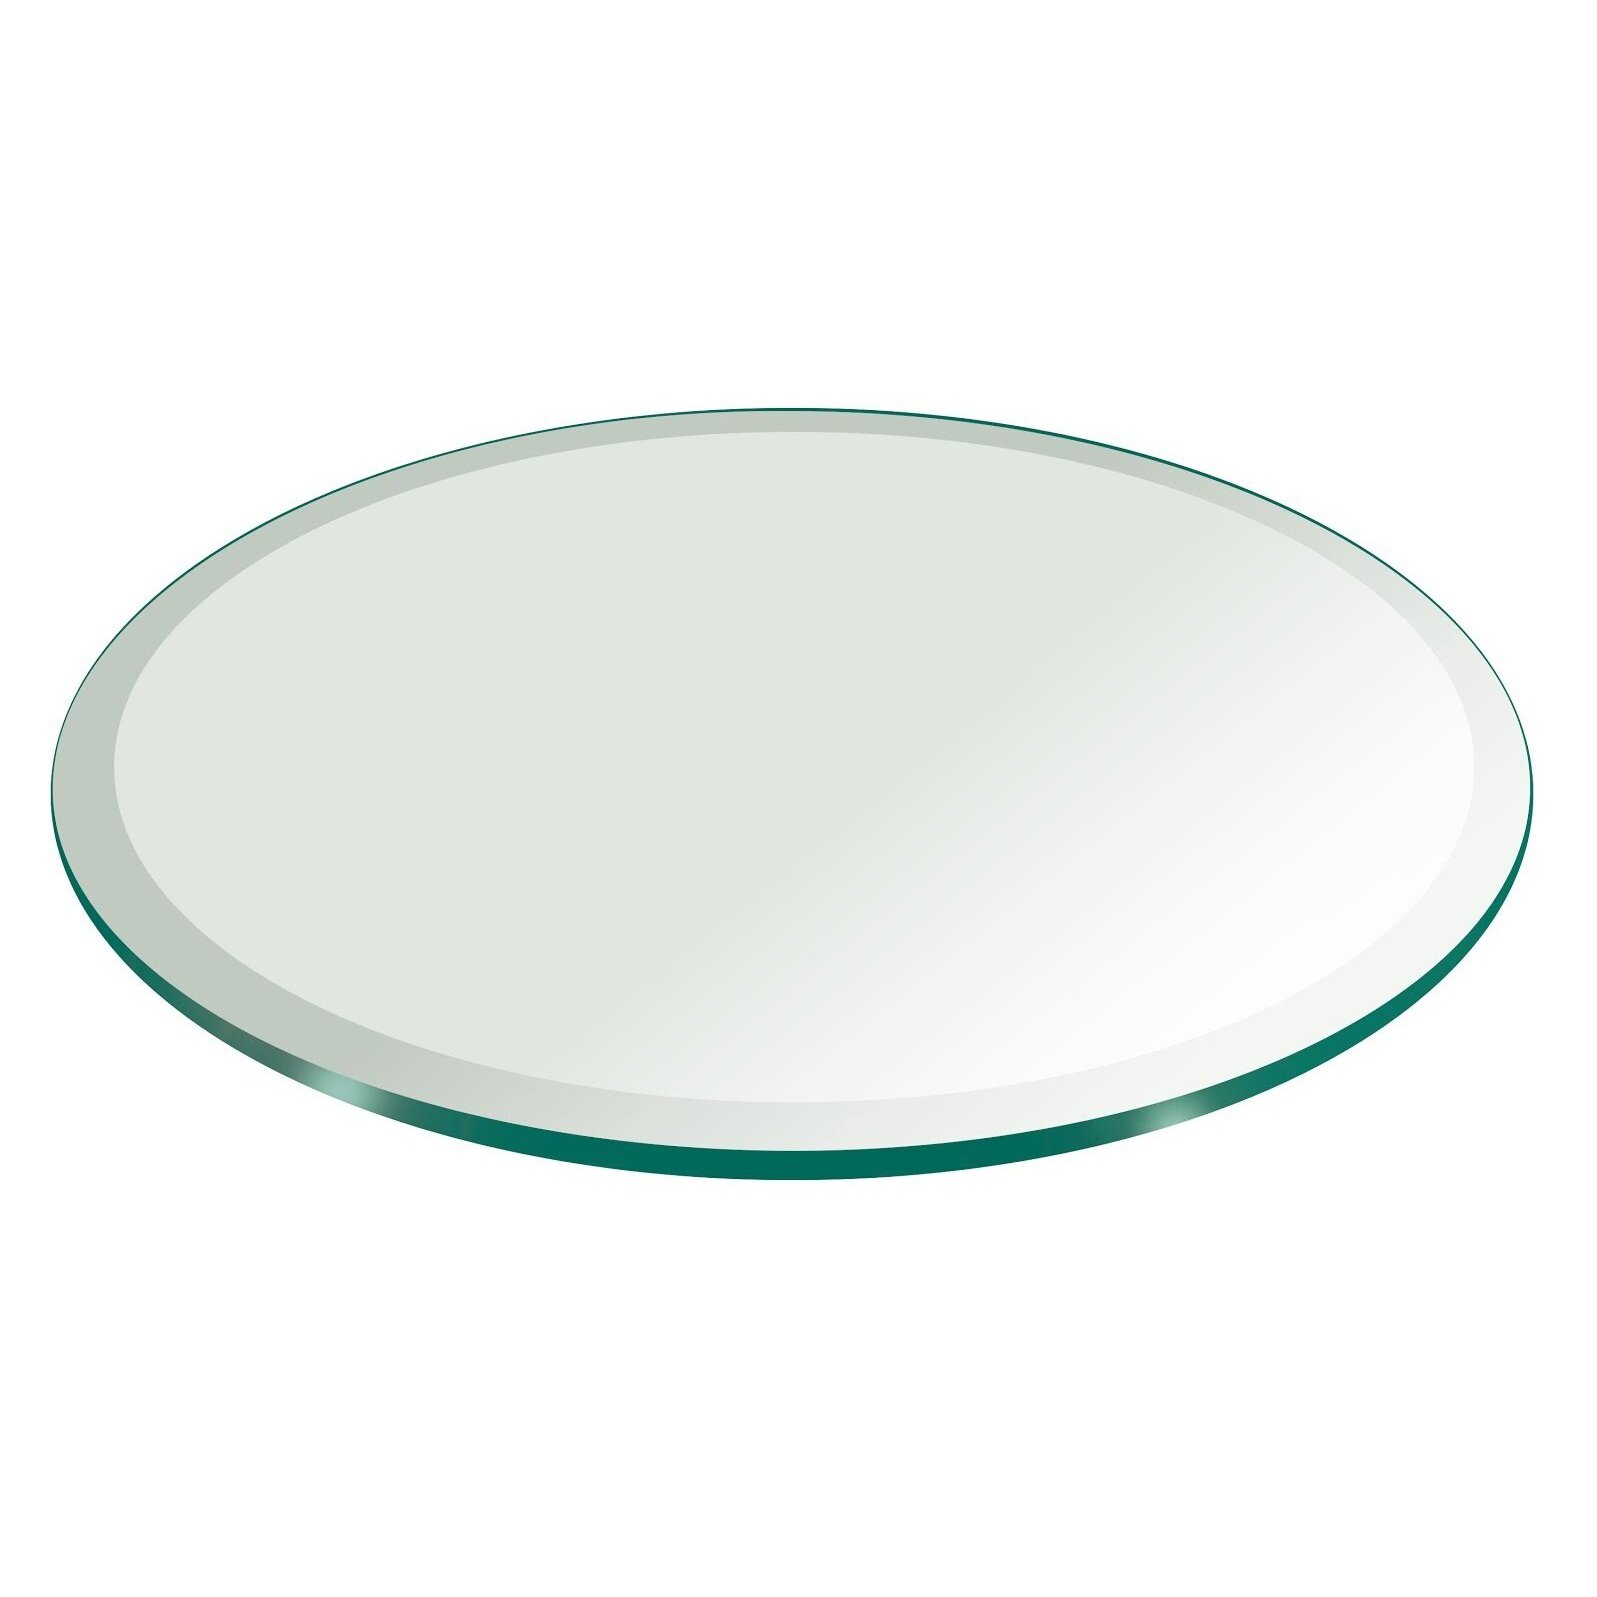 Fab Glass and Mirror 30" Round Beveled Tempered Glass Table Top